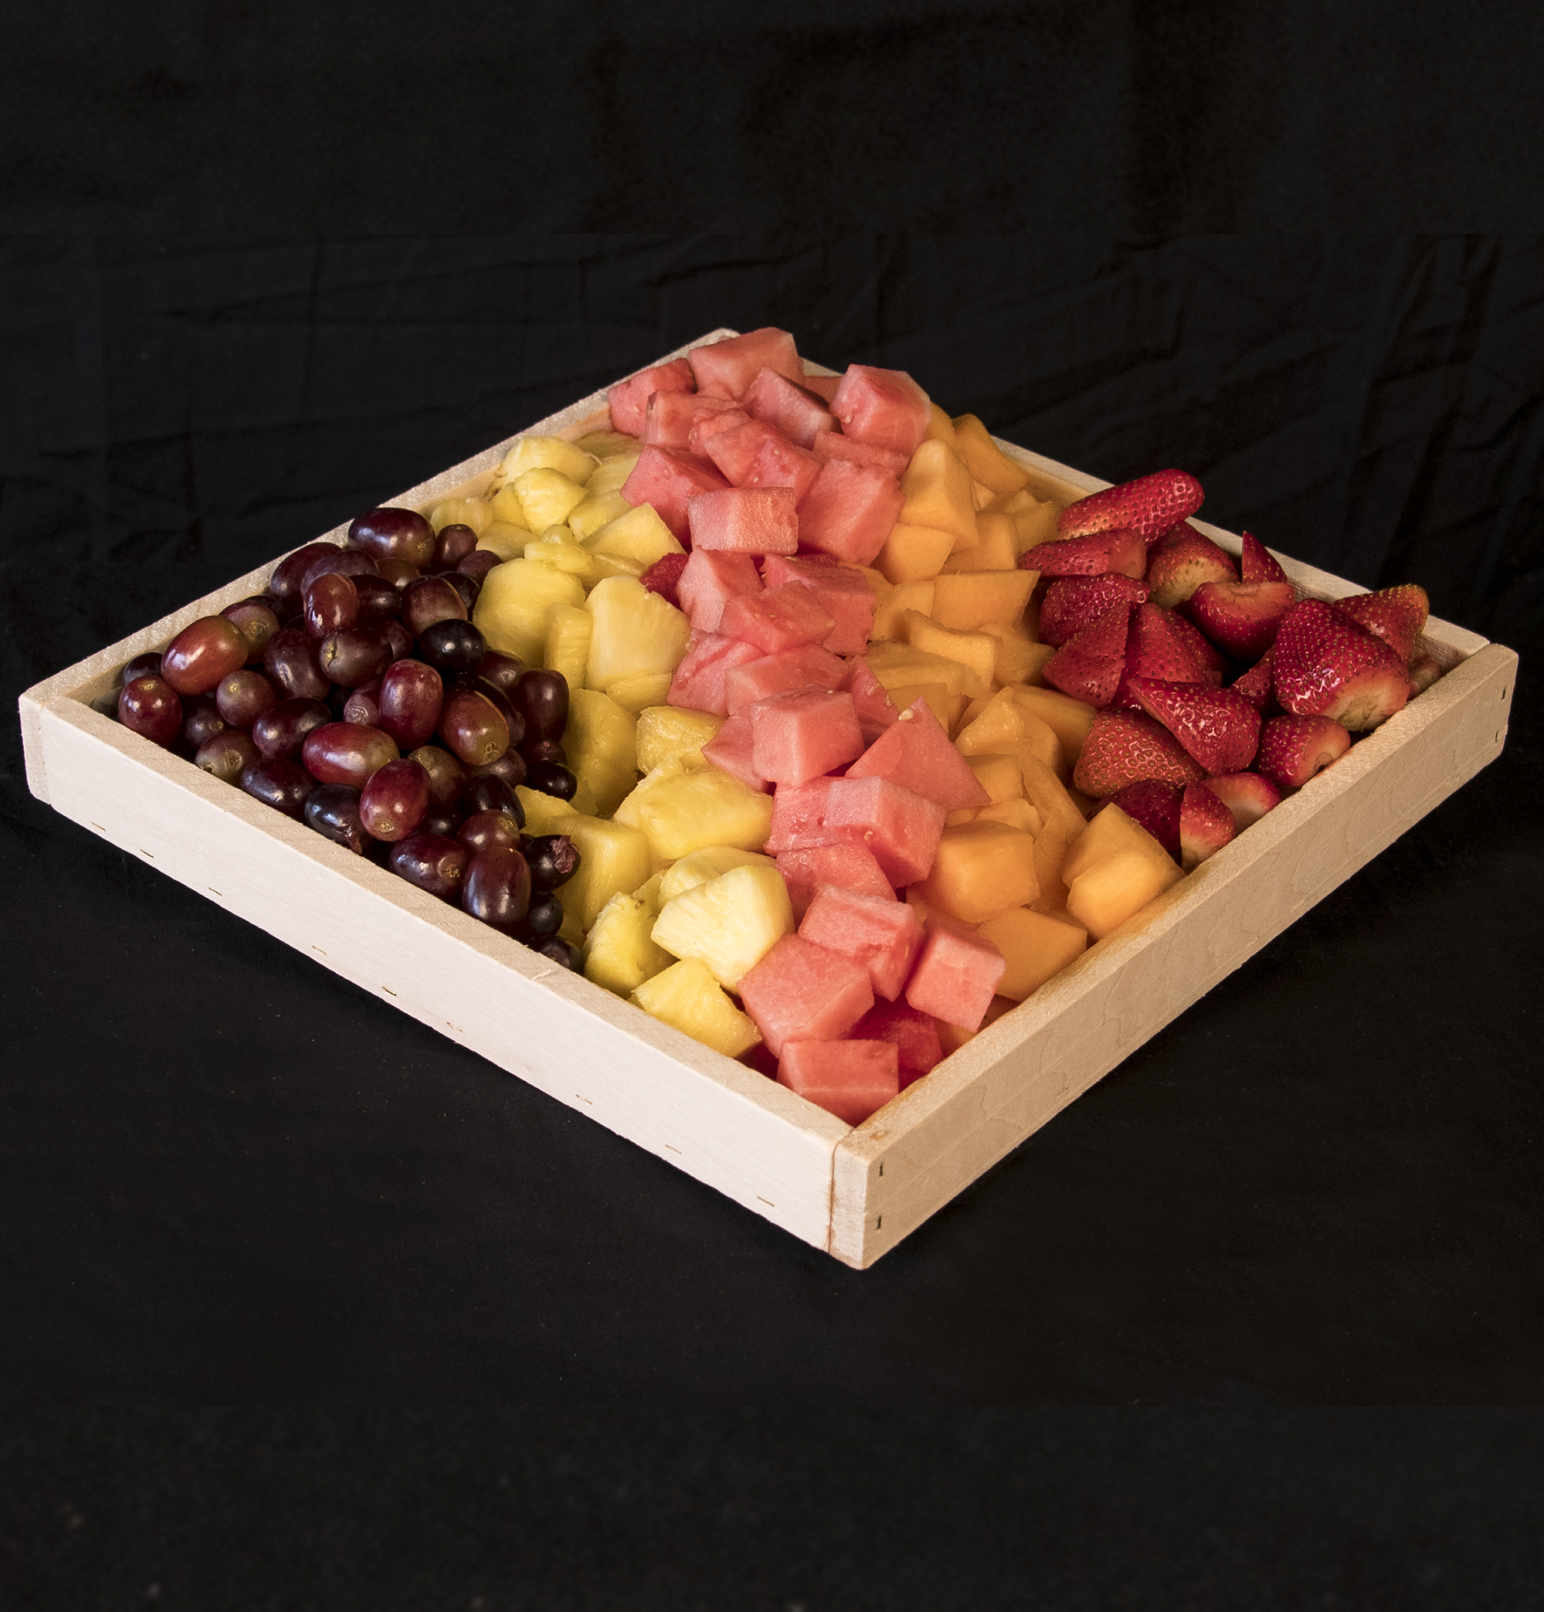 16" x 16" Tray Dufeck Wood Products